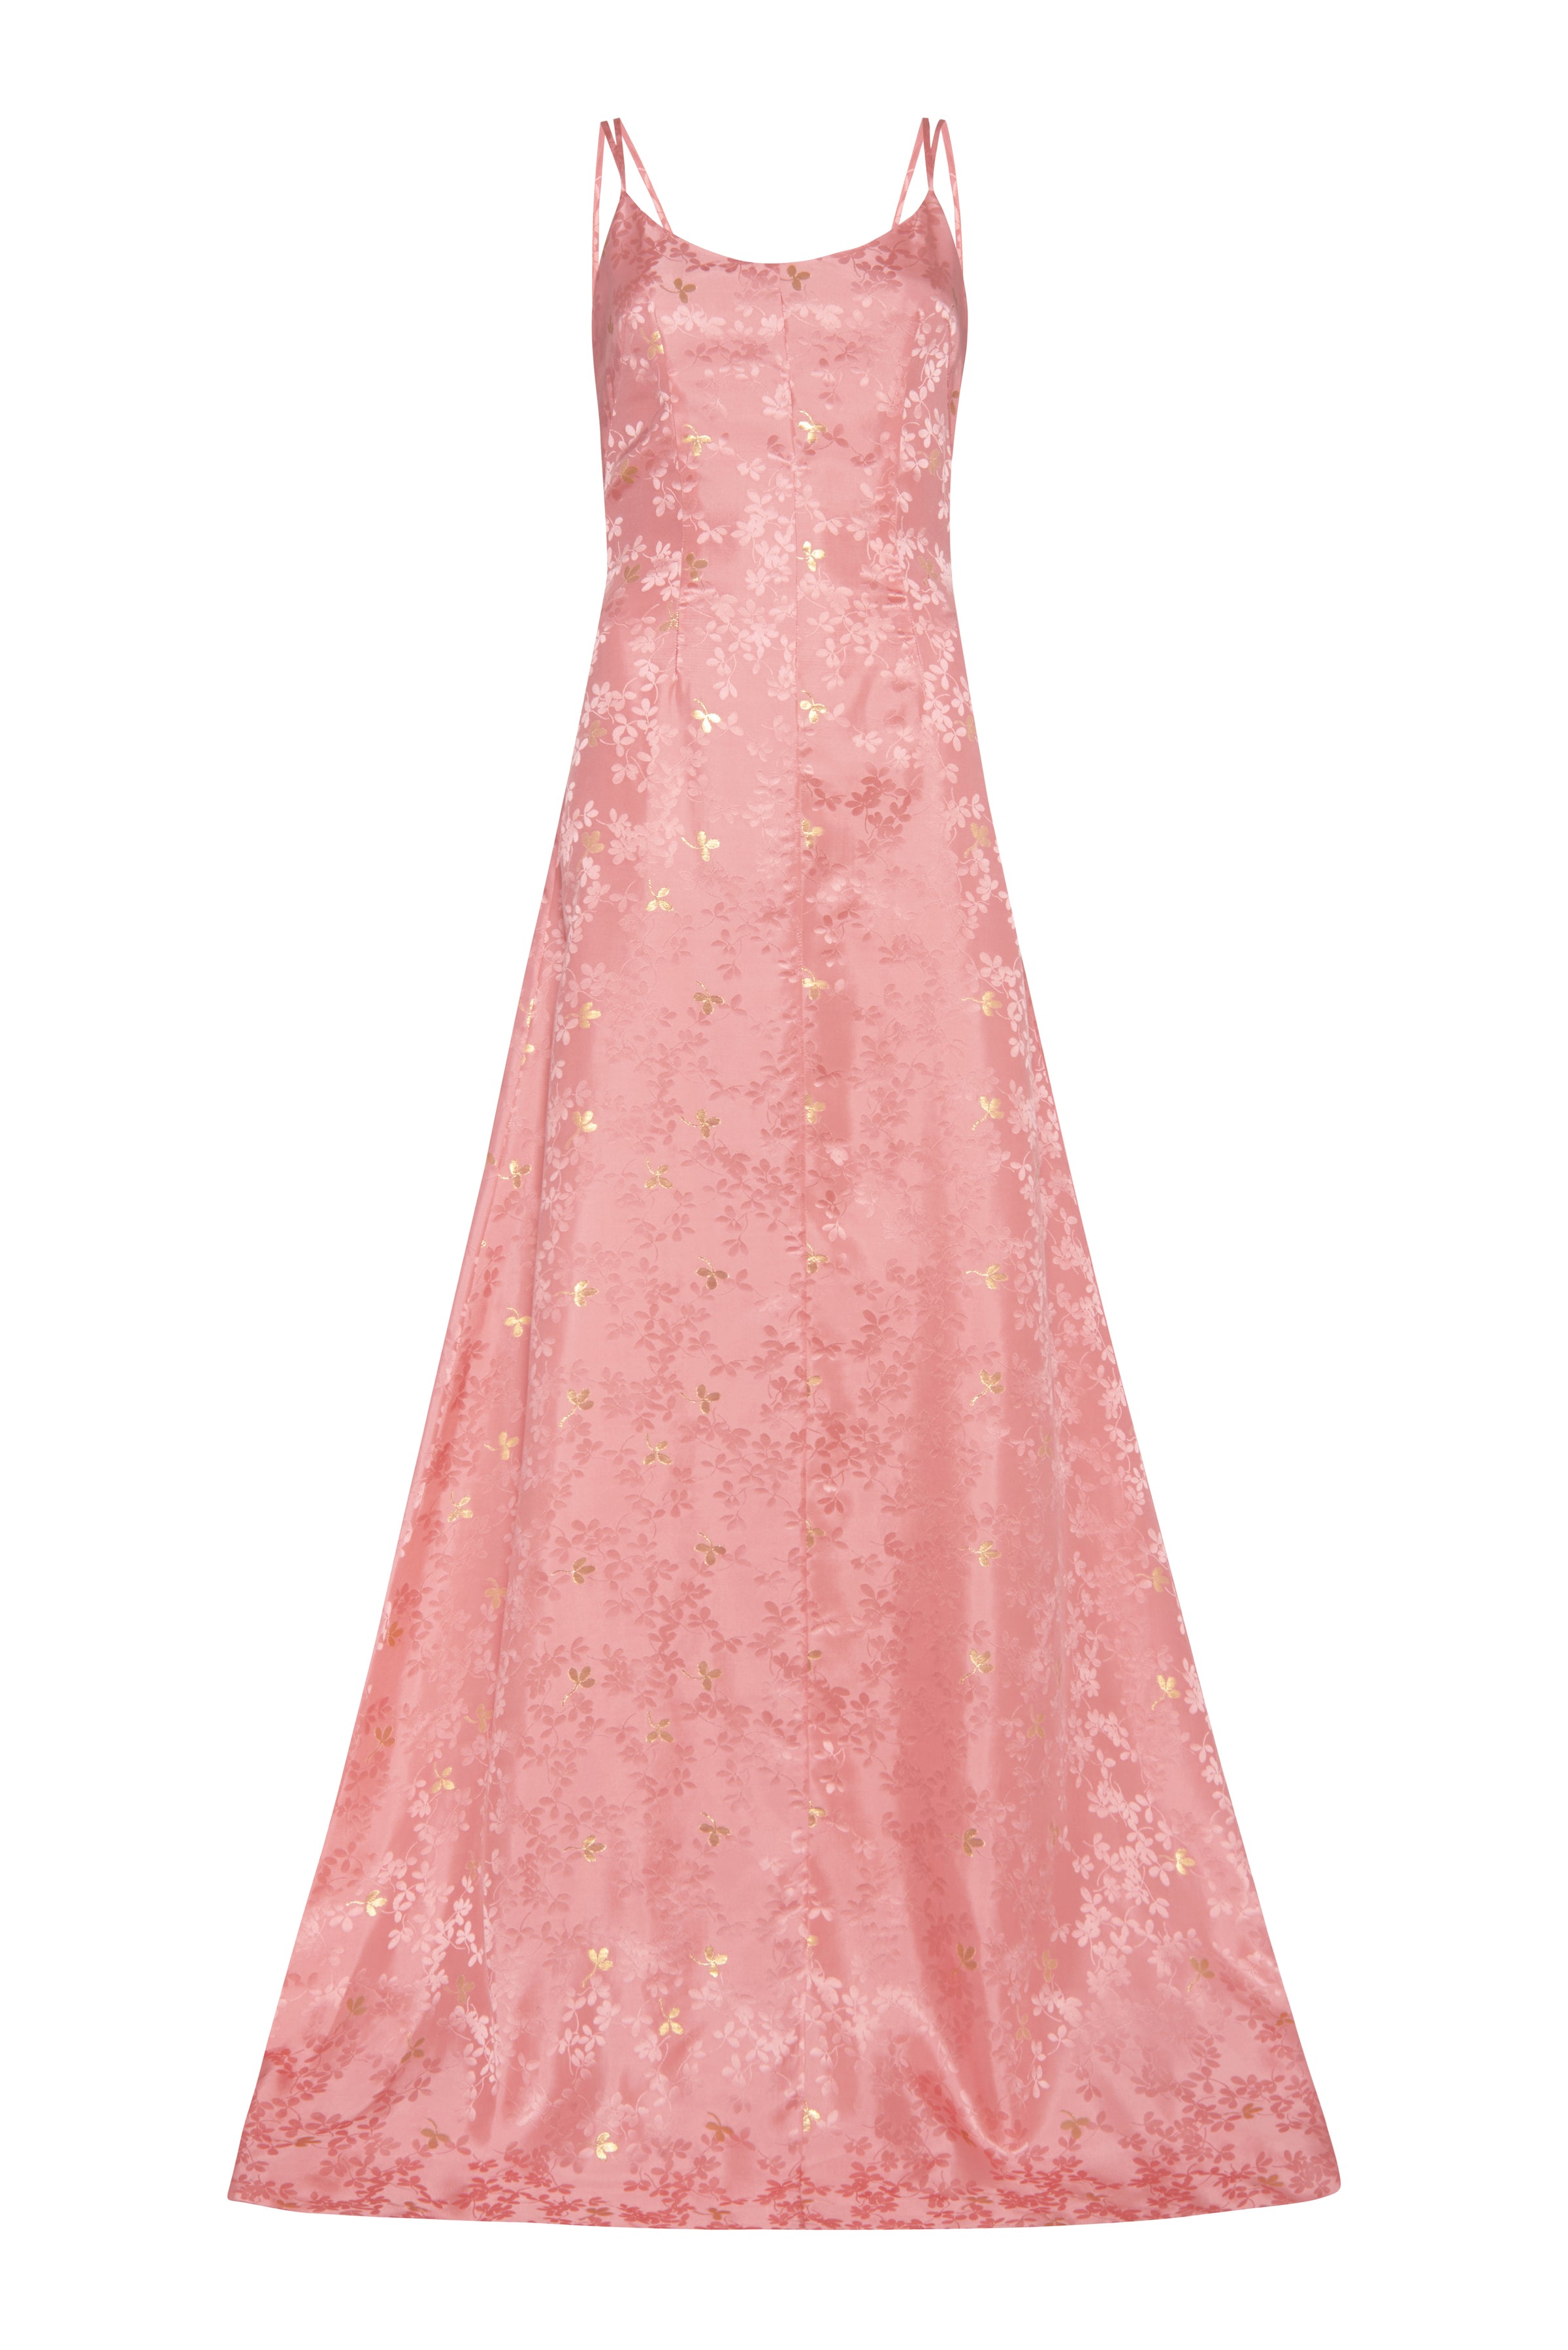 Phoenix Pink Floral Backless Gown